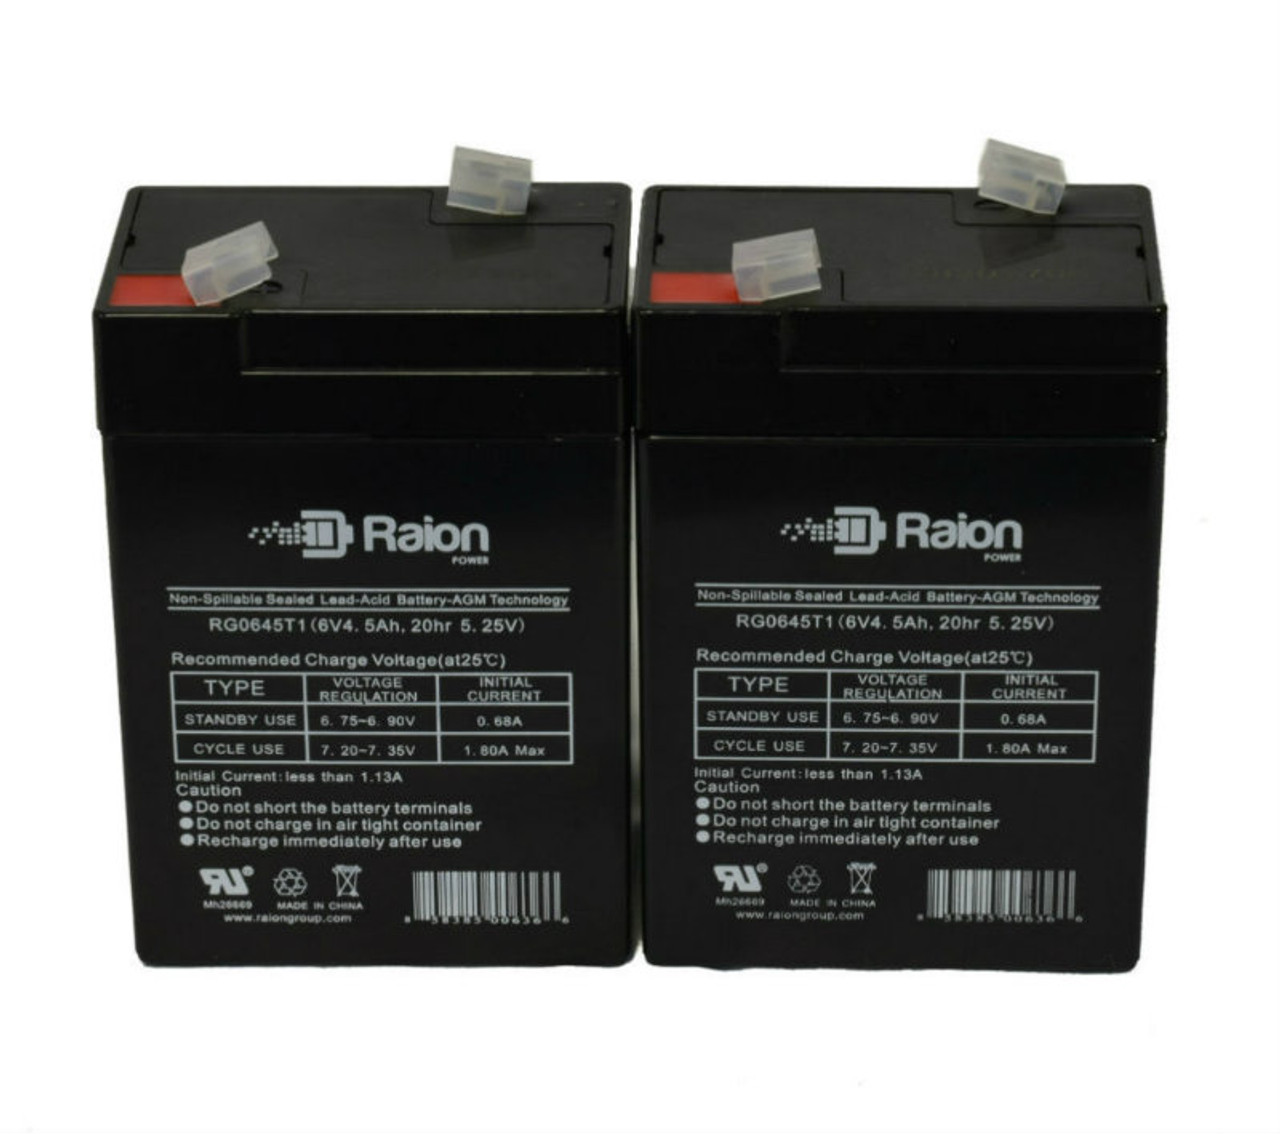 Raion Power 6 Volt 4.5Ah RG0645T1 Replacement Battery for Leader CT4.5-6 - 2 Pack